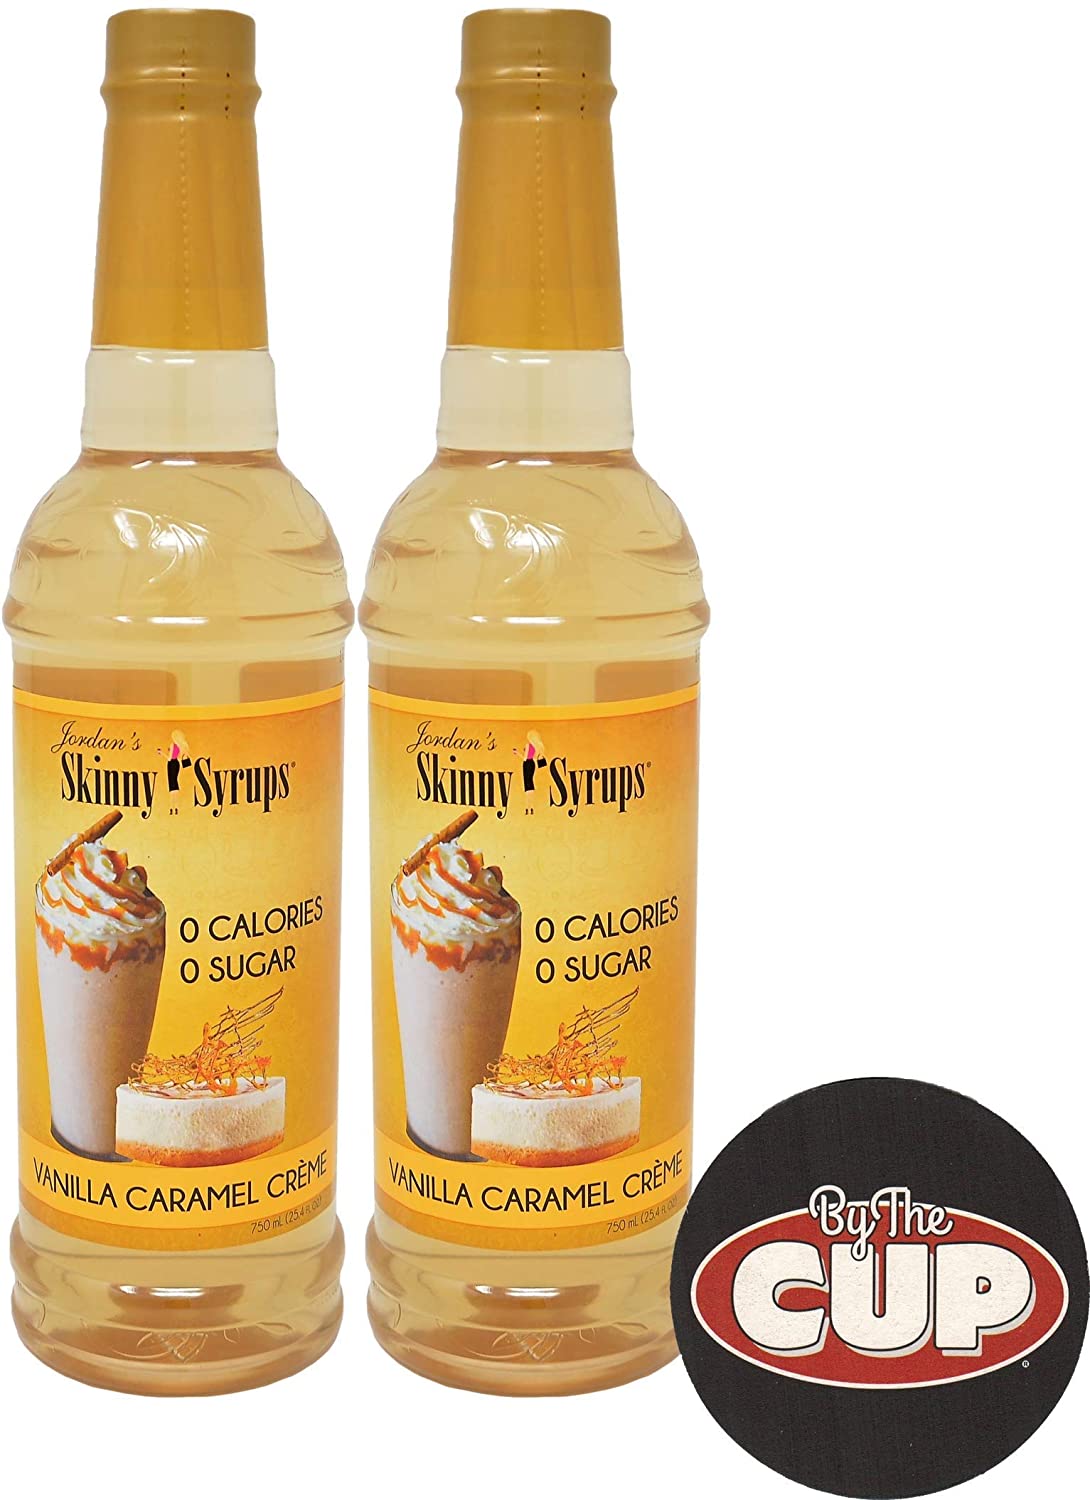 Jordan's Skinny Syrups Sugar Free Vanilla Caramel Creme 750 ml (Pack of 2) with By The Cup Coaster